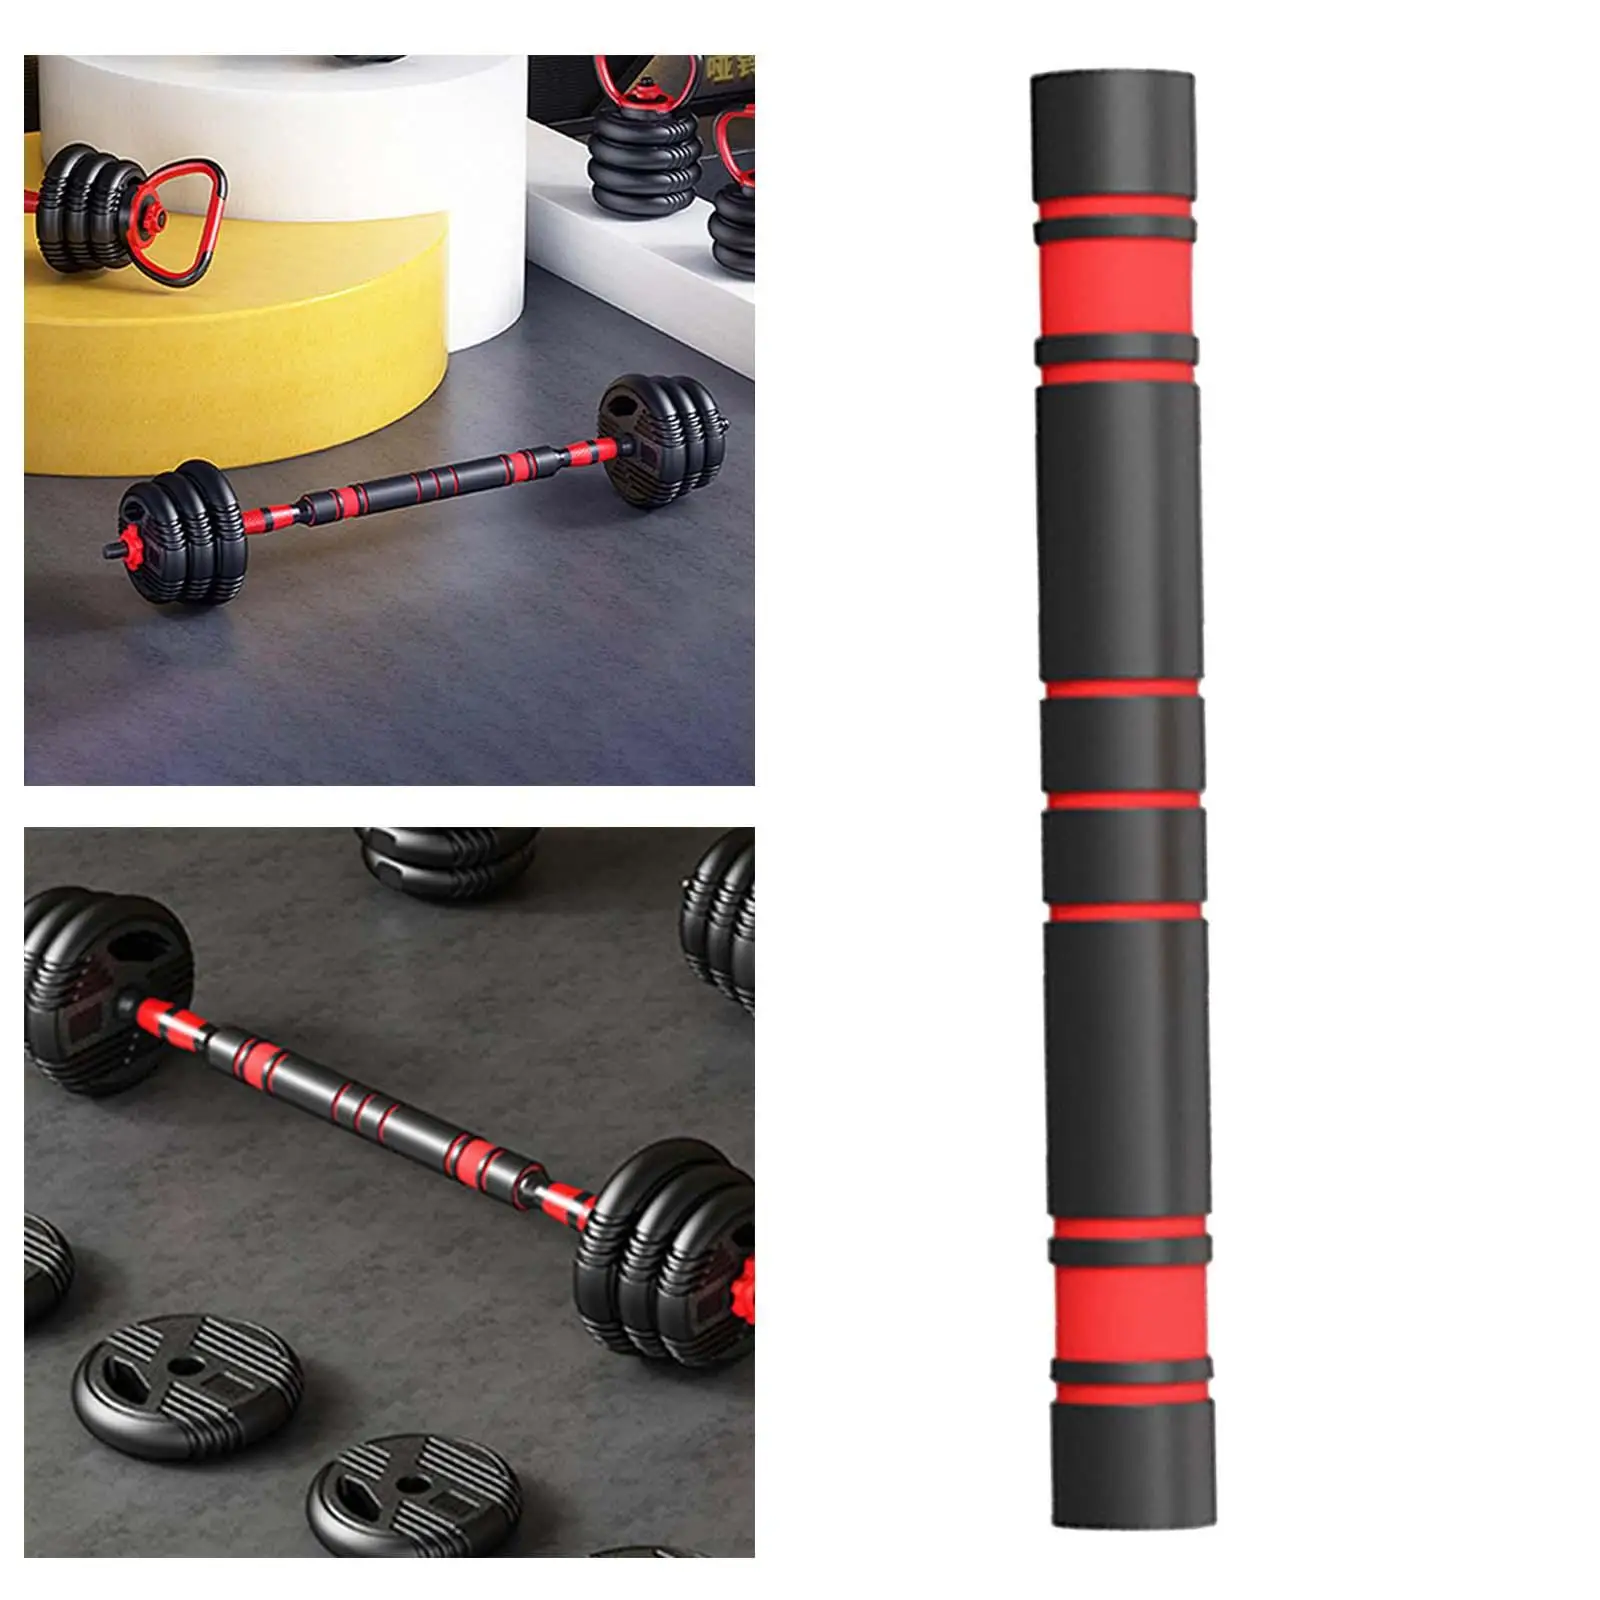 Dumbbell Connecting Rod Adjustable Connector Weight Handlebar Attachment Loadable Dumbbell Handlebar for Workout Sport Training